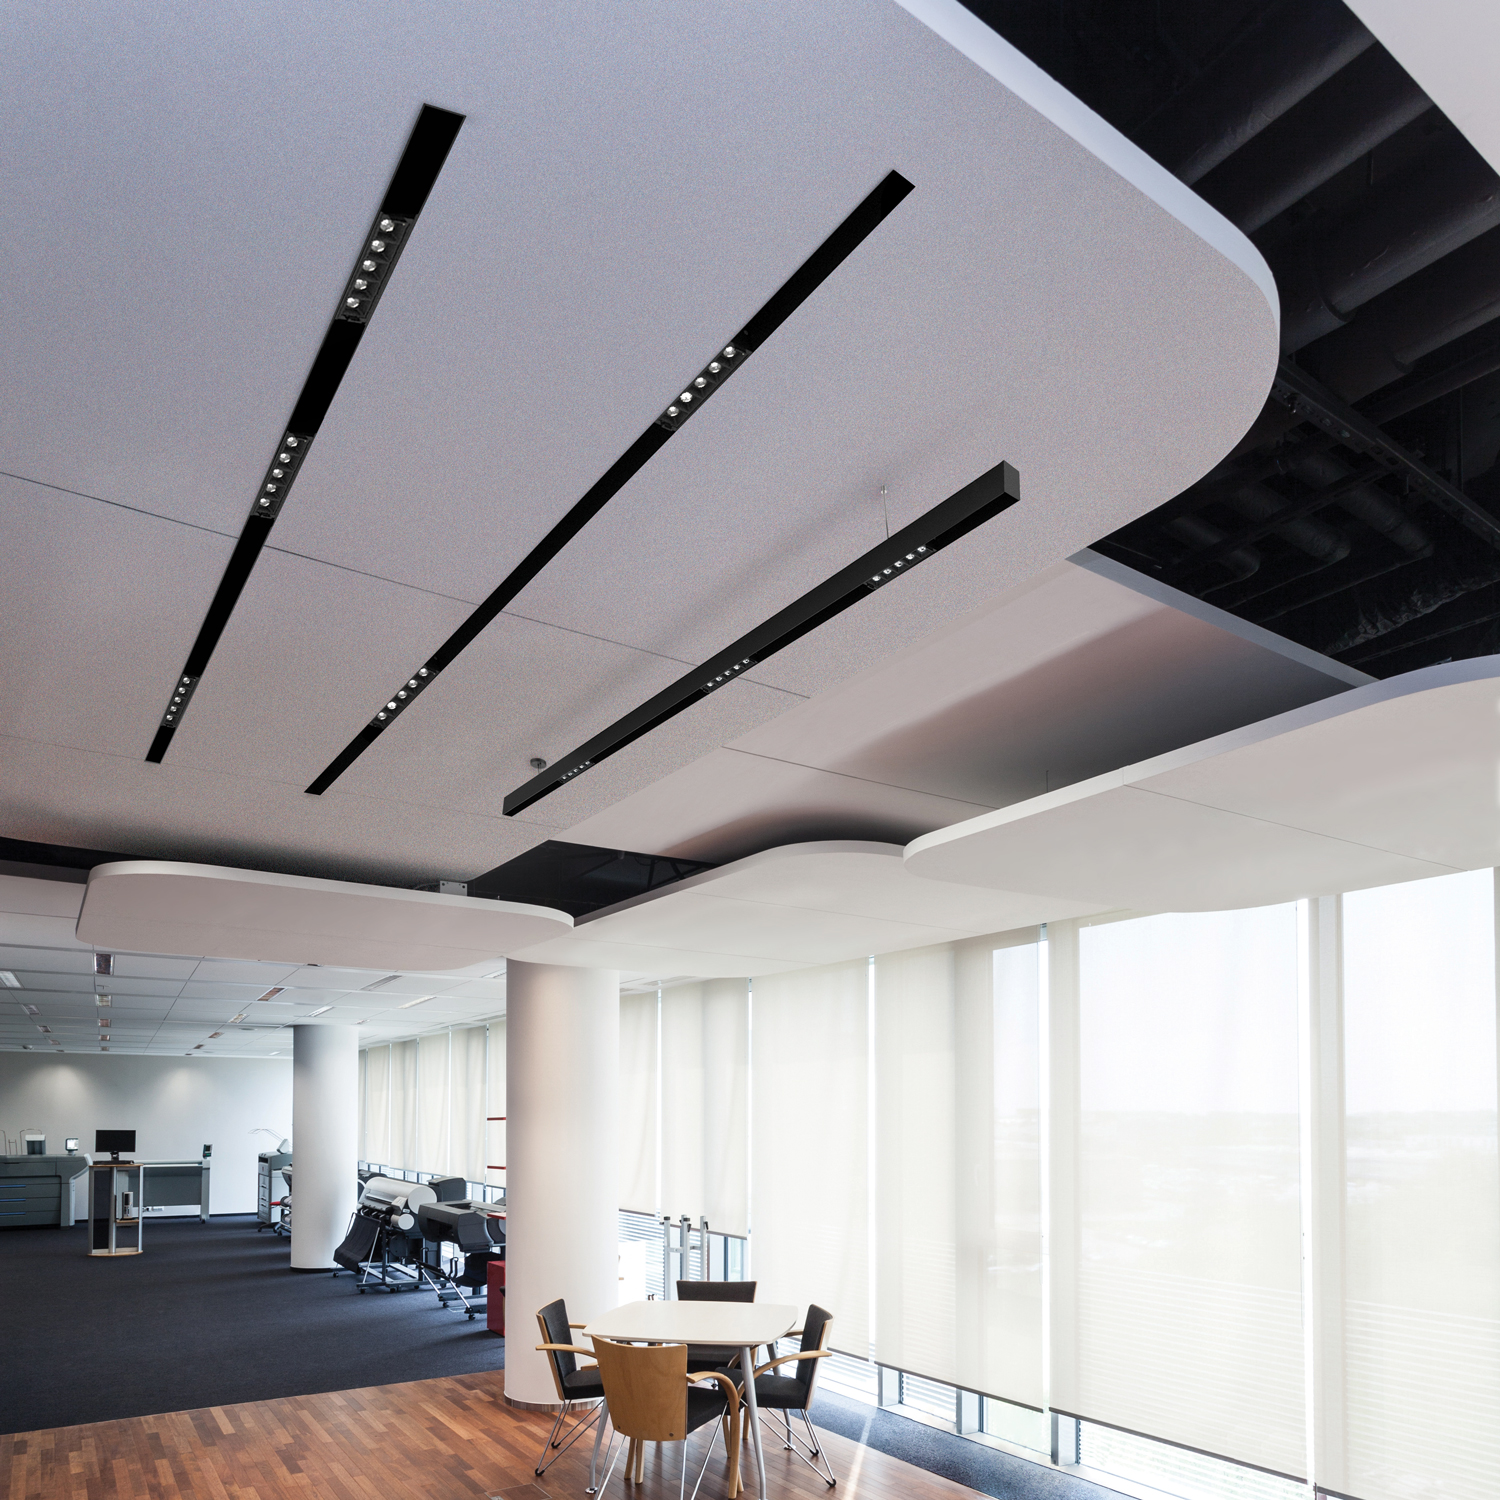 Construct 6 Ft Surface Mount track lighting in an office setting.